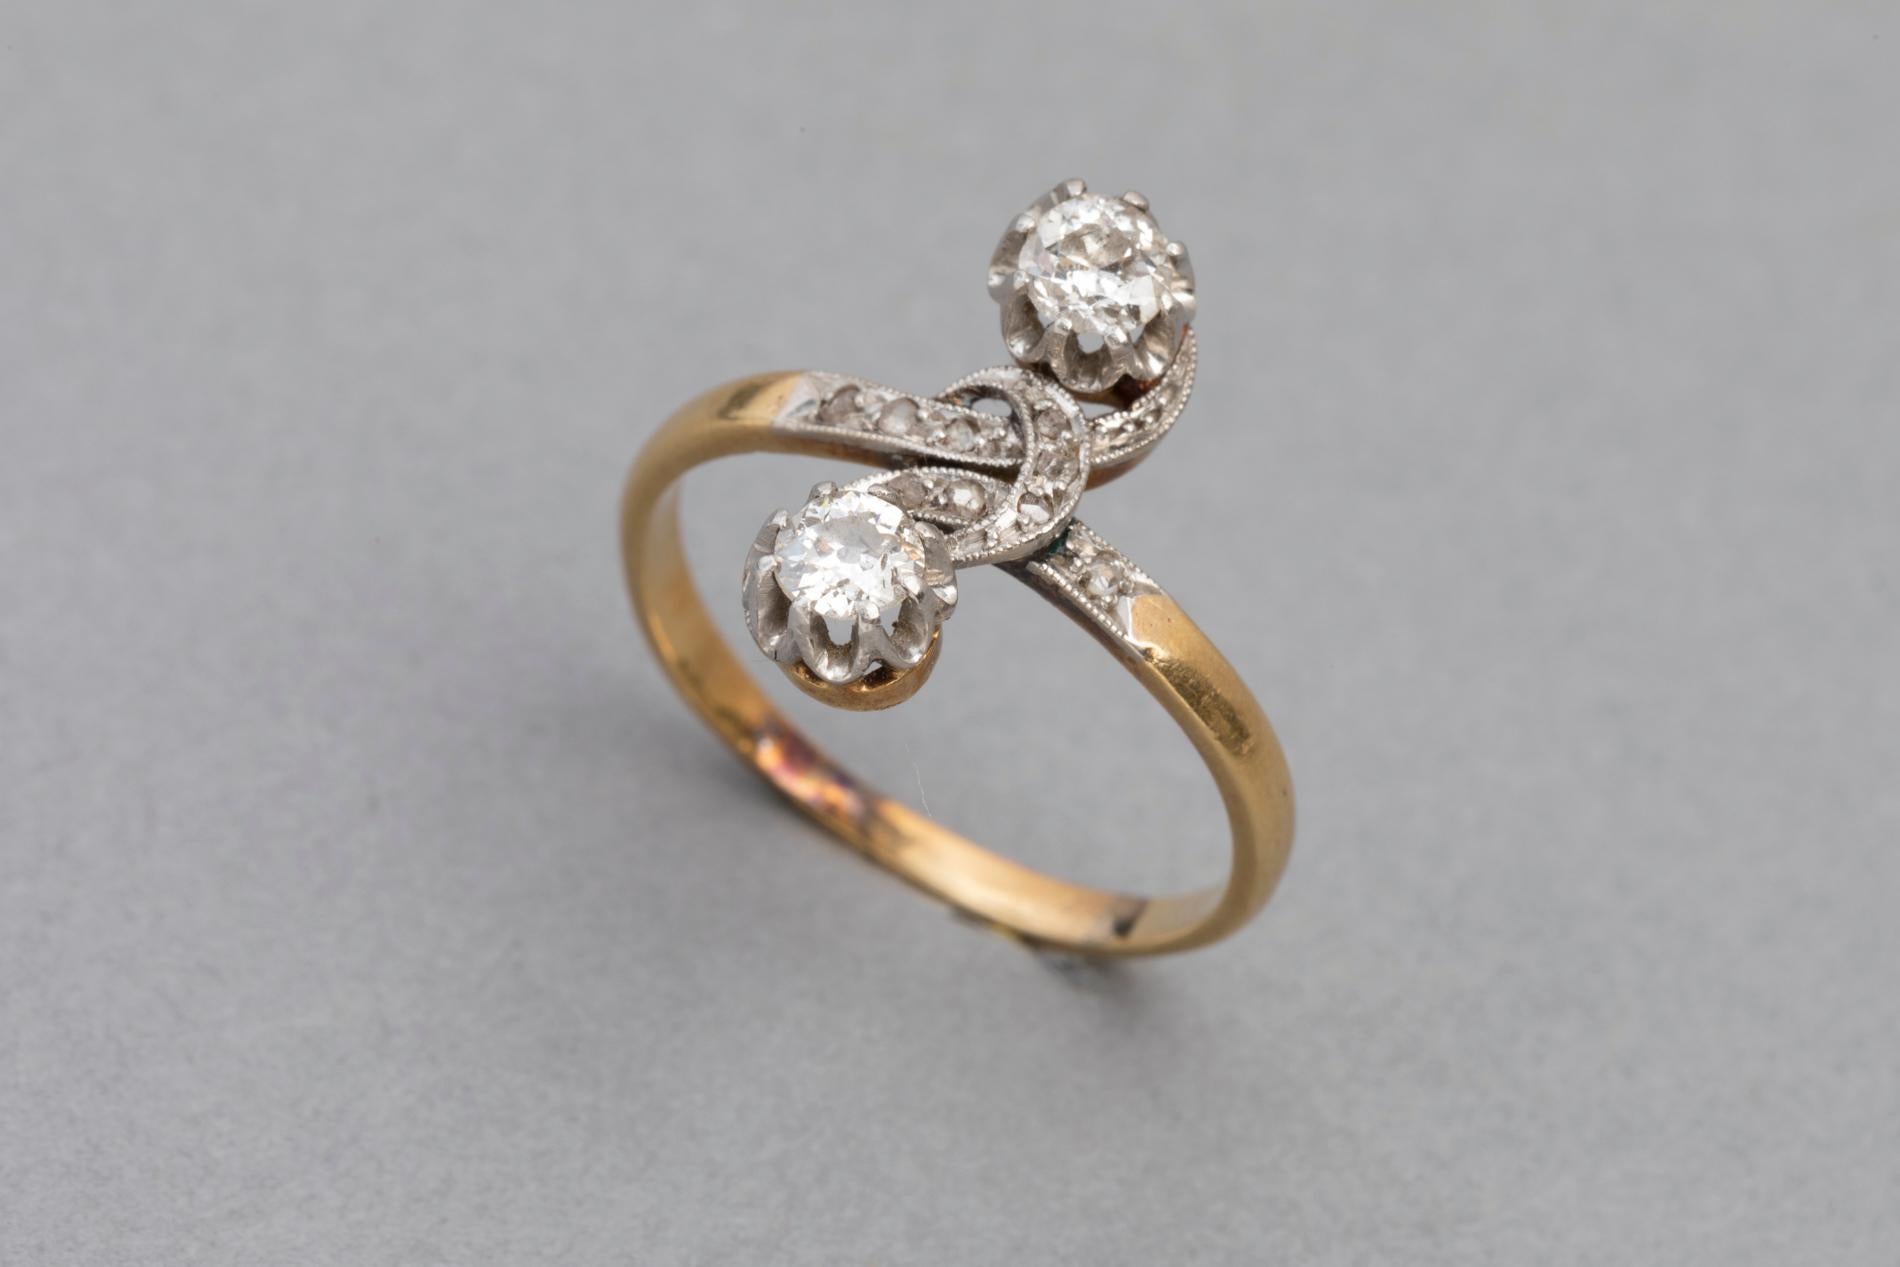 Very lovely antique ring. Crossover or Toi et moi shape designed.

Made in France circa 1910 (edwardian? )

Mounted with yellow gold 18k and platinum  (French control marks: Owl and Old man)

Set with two beautiful Round old european curt diamonds